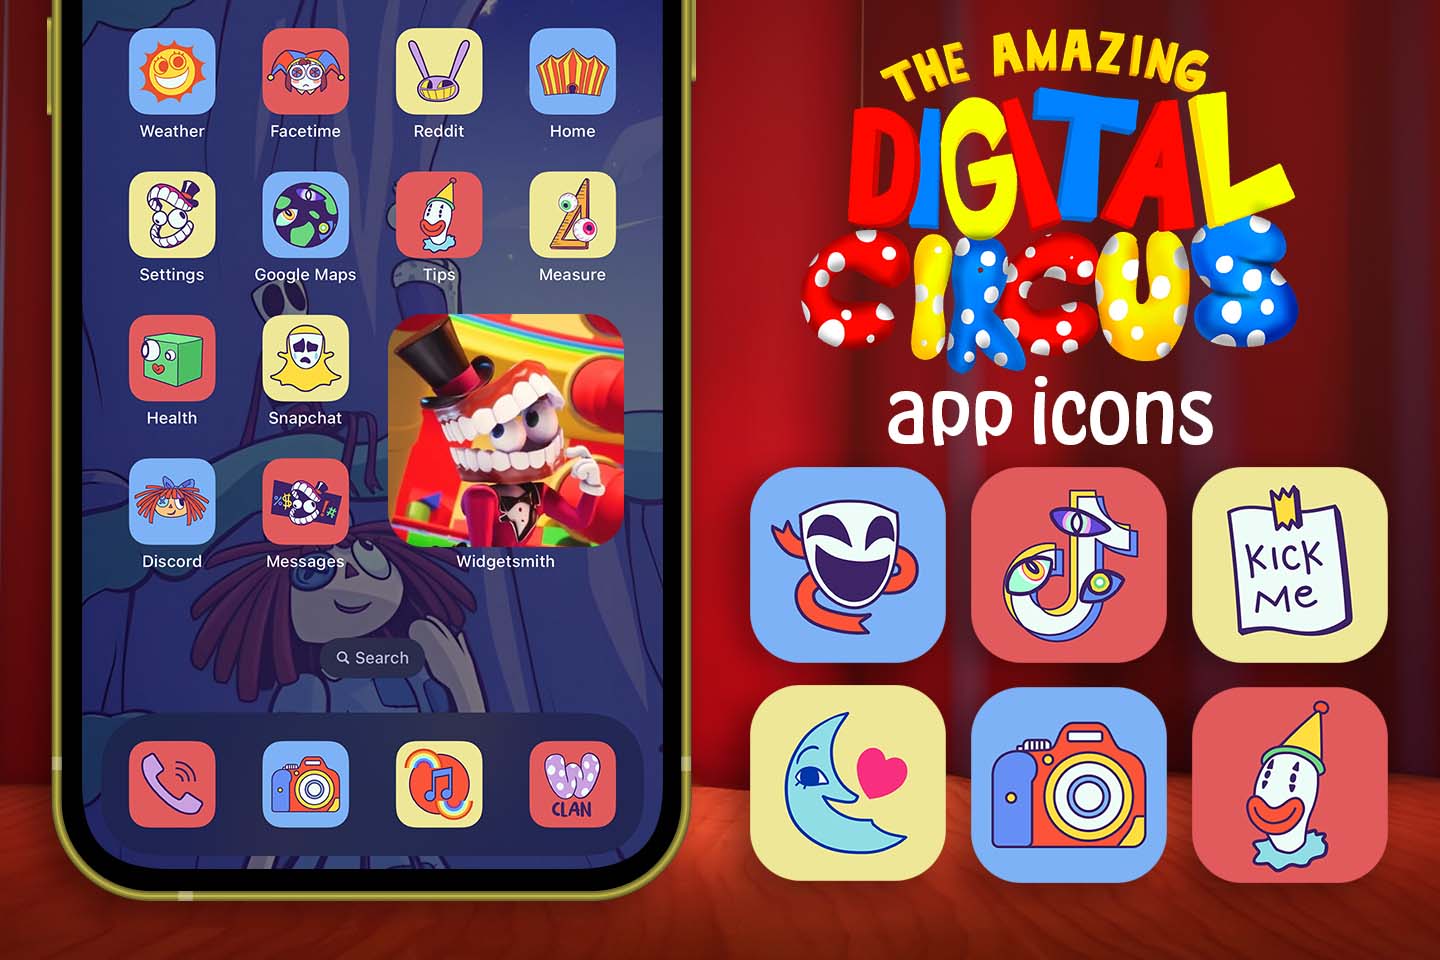 the amazing digital circus app icons pack